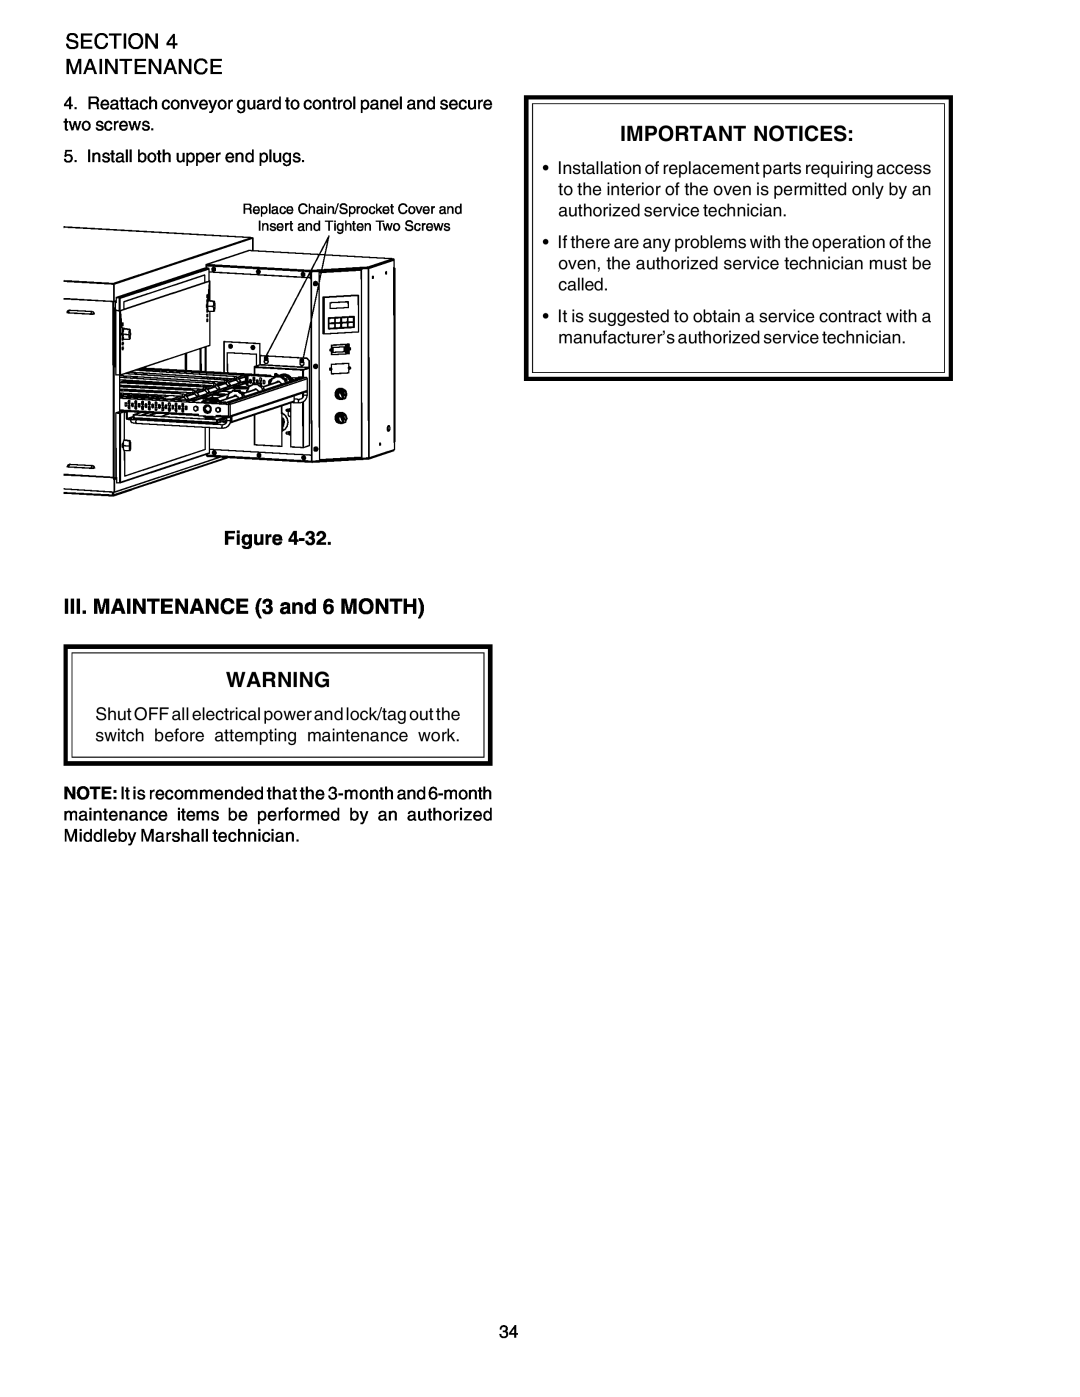 Middleby Marshall PS624E installation manual Important Notices, III. MAINTENANCE 3 and 6 MONTH, Section Maintenance 